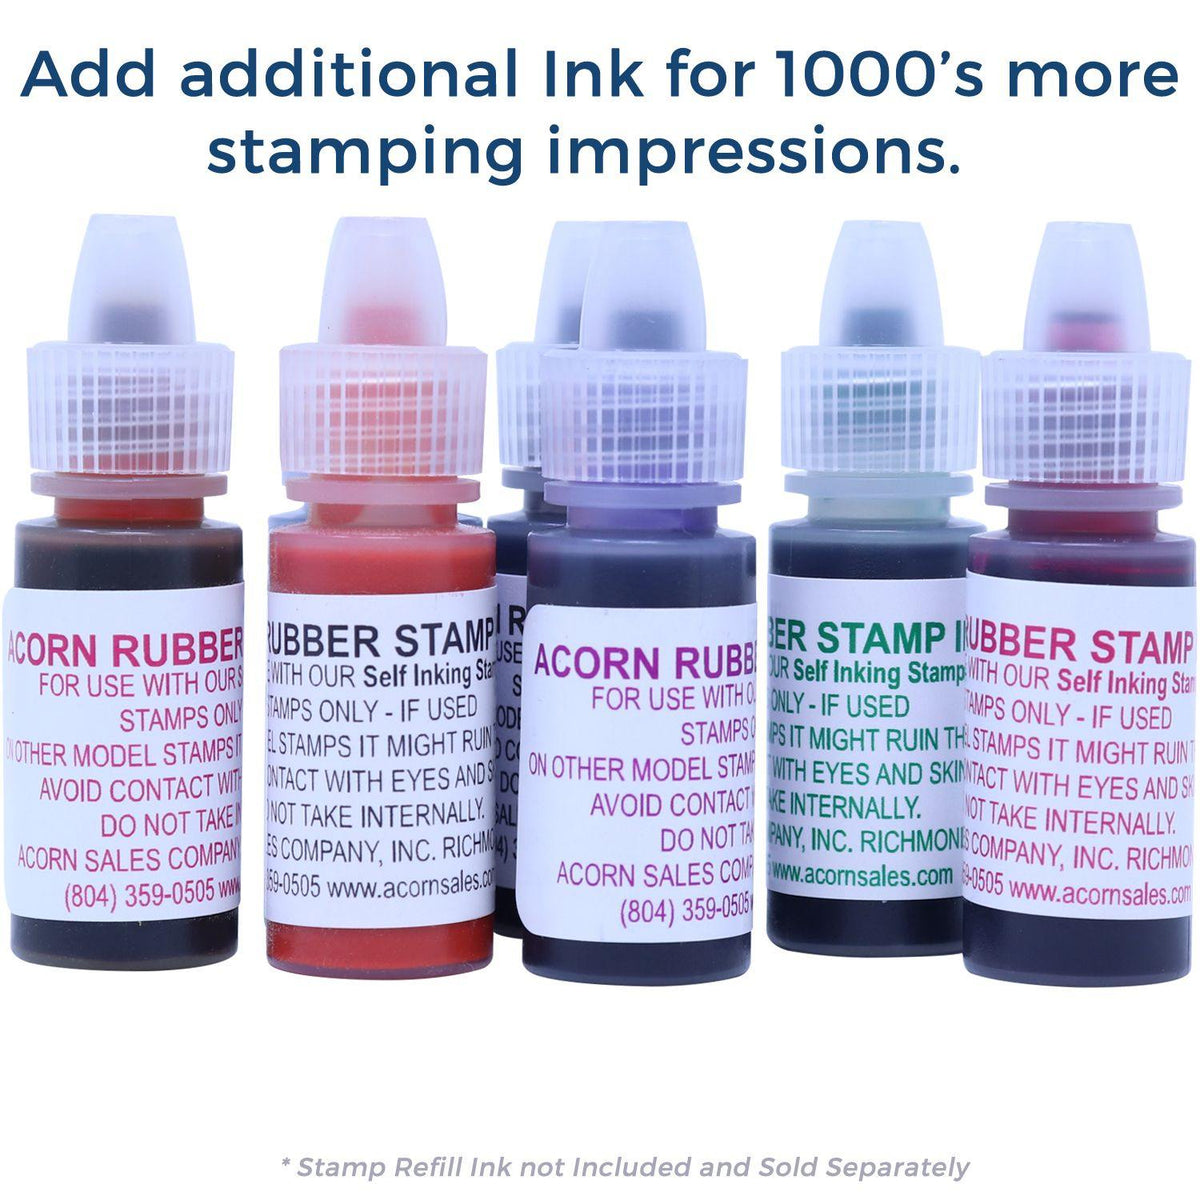 Refill Inks for Large Pre Inked Trustee Exhibit Stamp Available